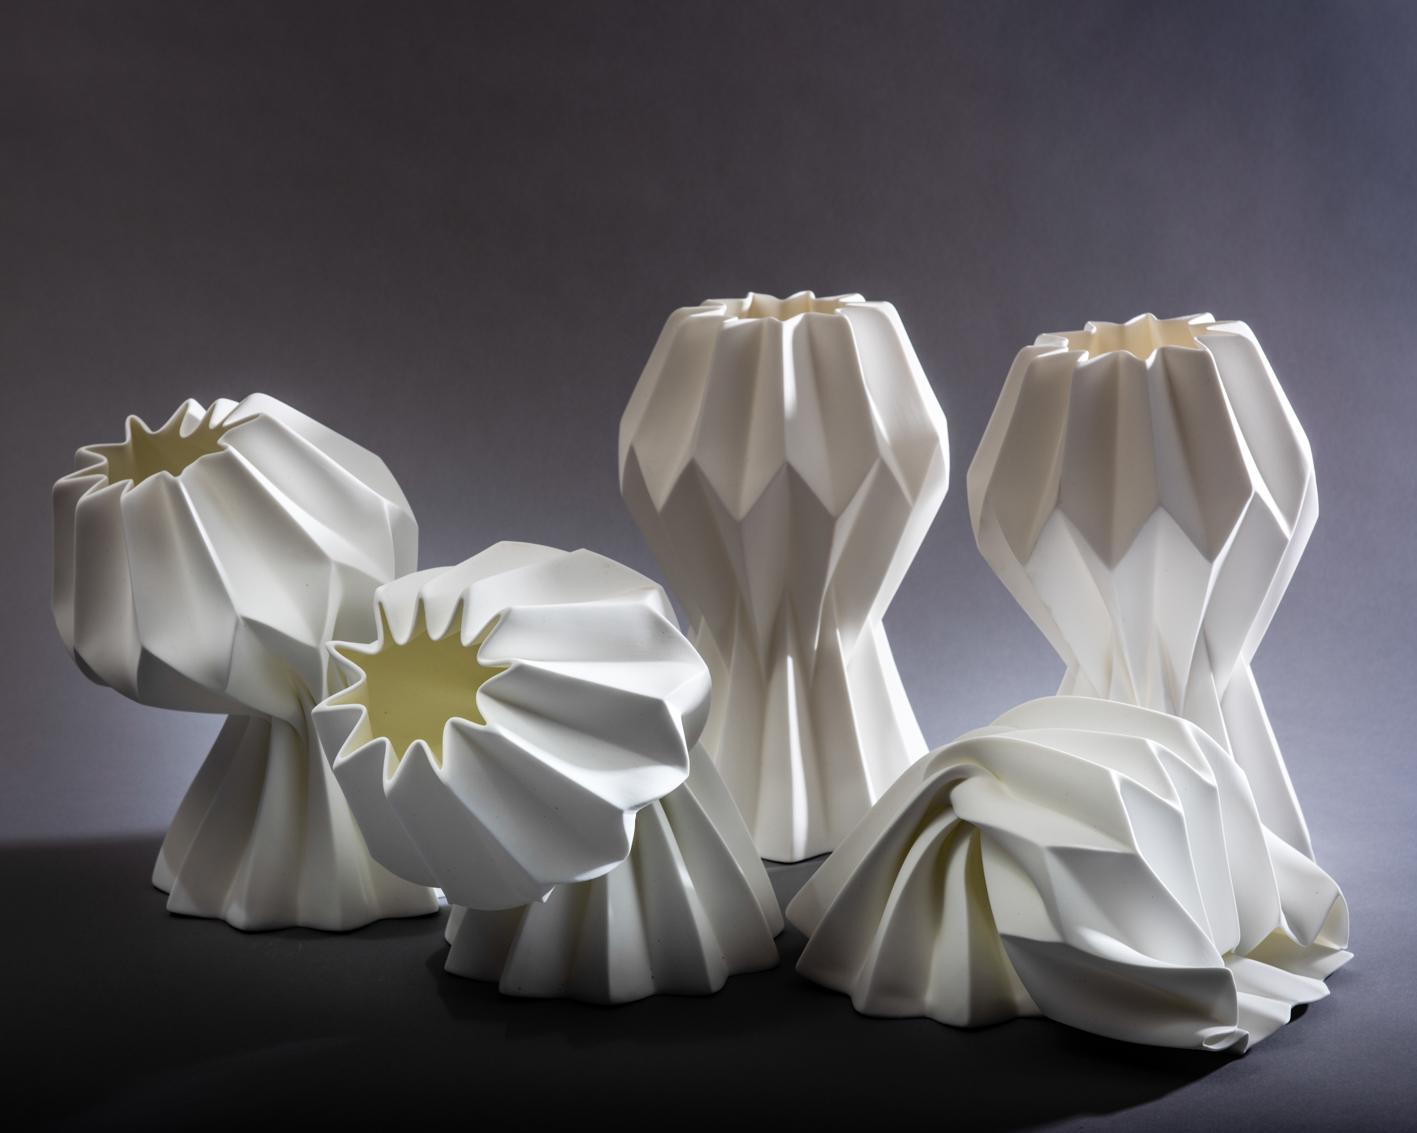 Slump vase – total slump variation – capturing ideas of form, structure and failure; the pleated paper form is translated into a Fine bone china that is stressed through the excessive heat of the furnace into a poetic collapse. Developed in the